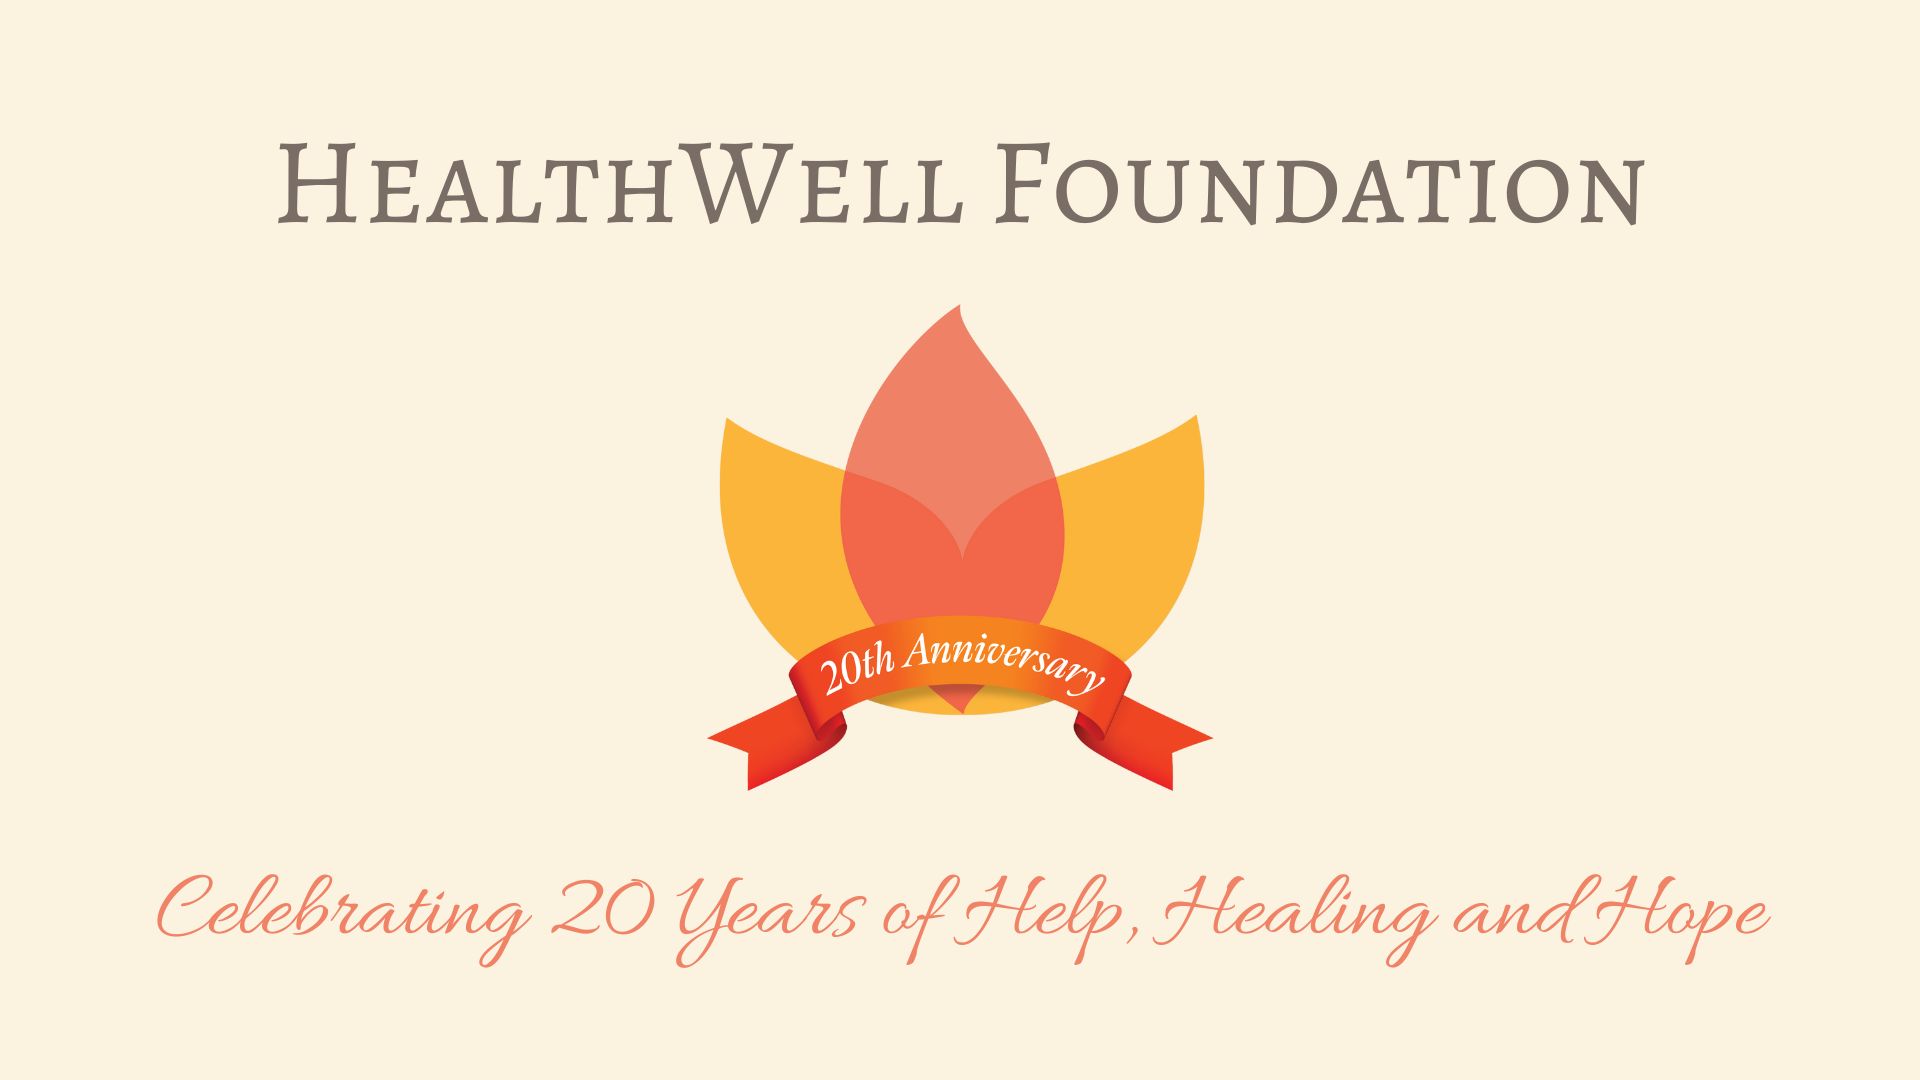 HealthWell Foundation 20th anniversary banner with their logo and text "celebrating 20 years of help, healing and hope."